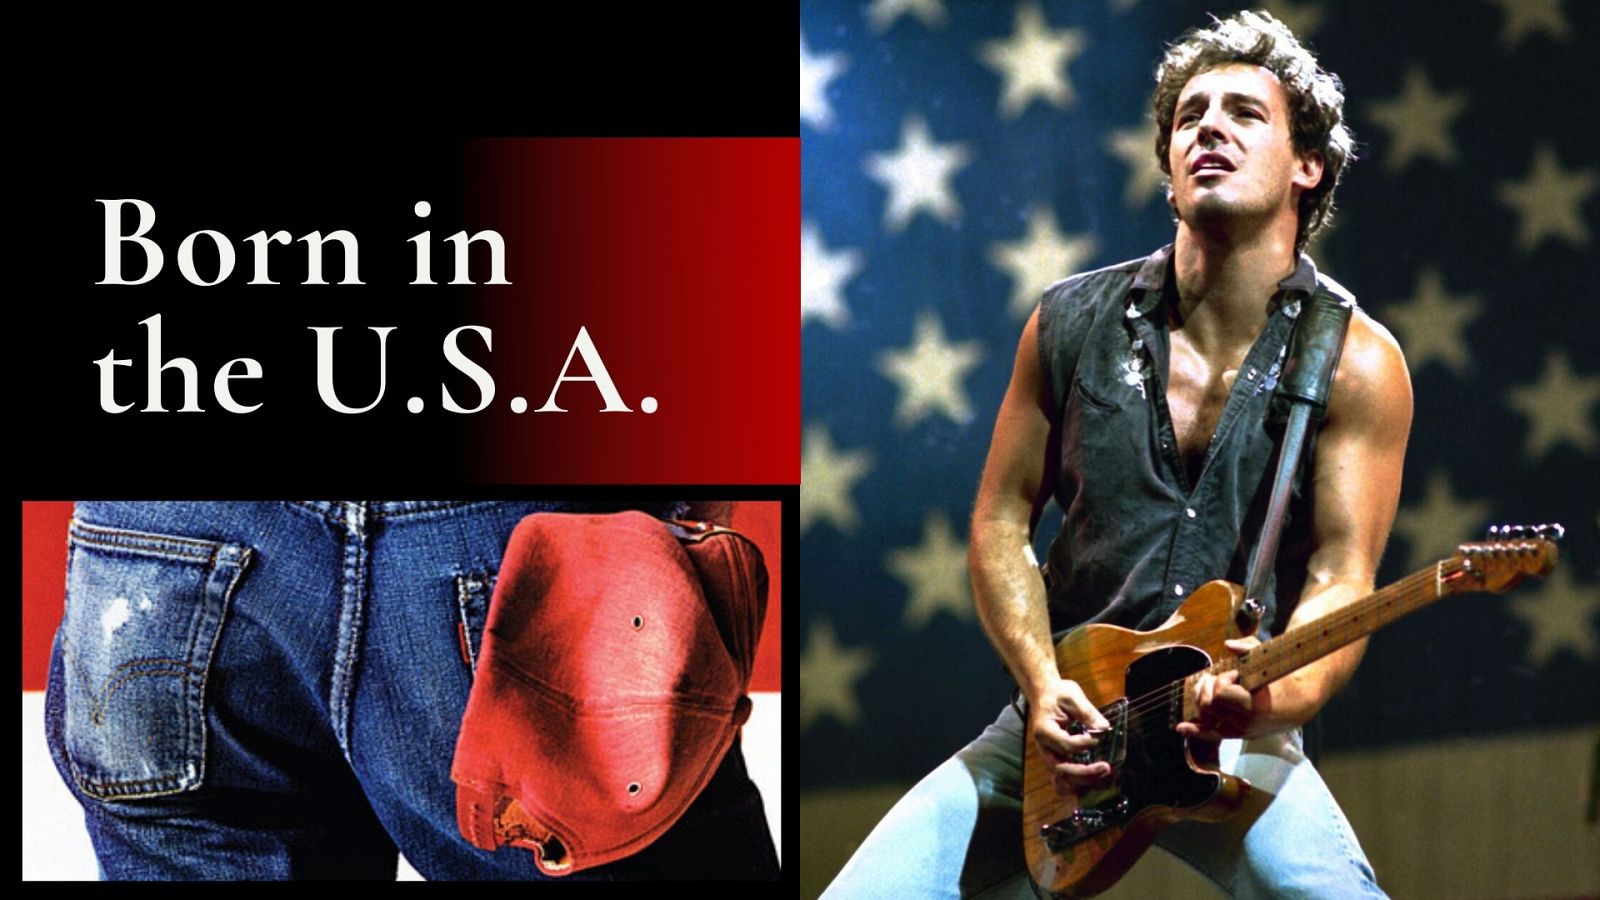 Born in the U.S.A., Bruce Springsteen (1984).